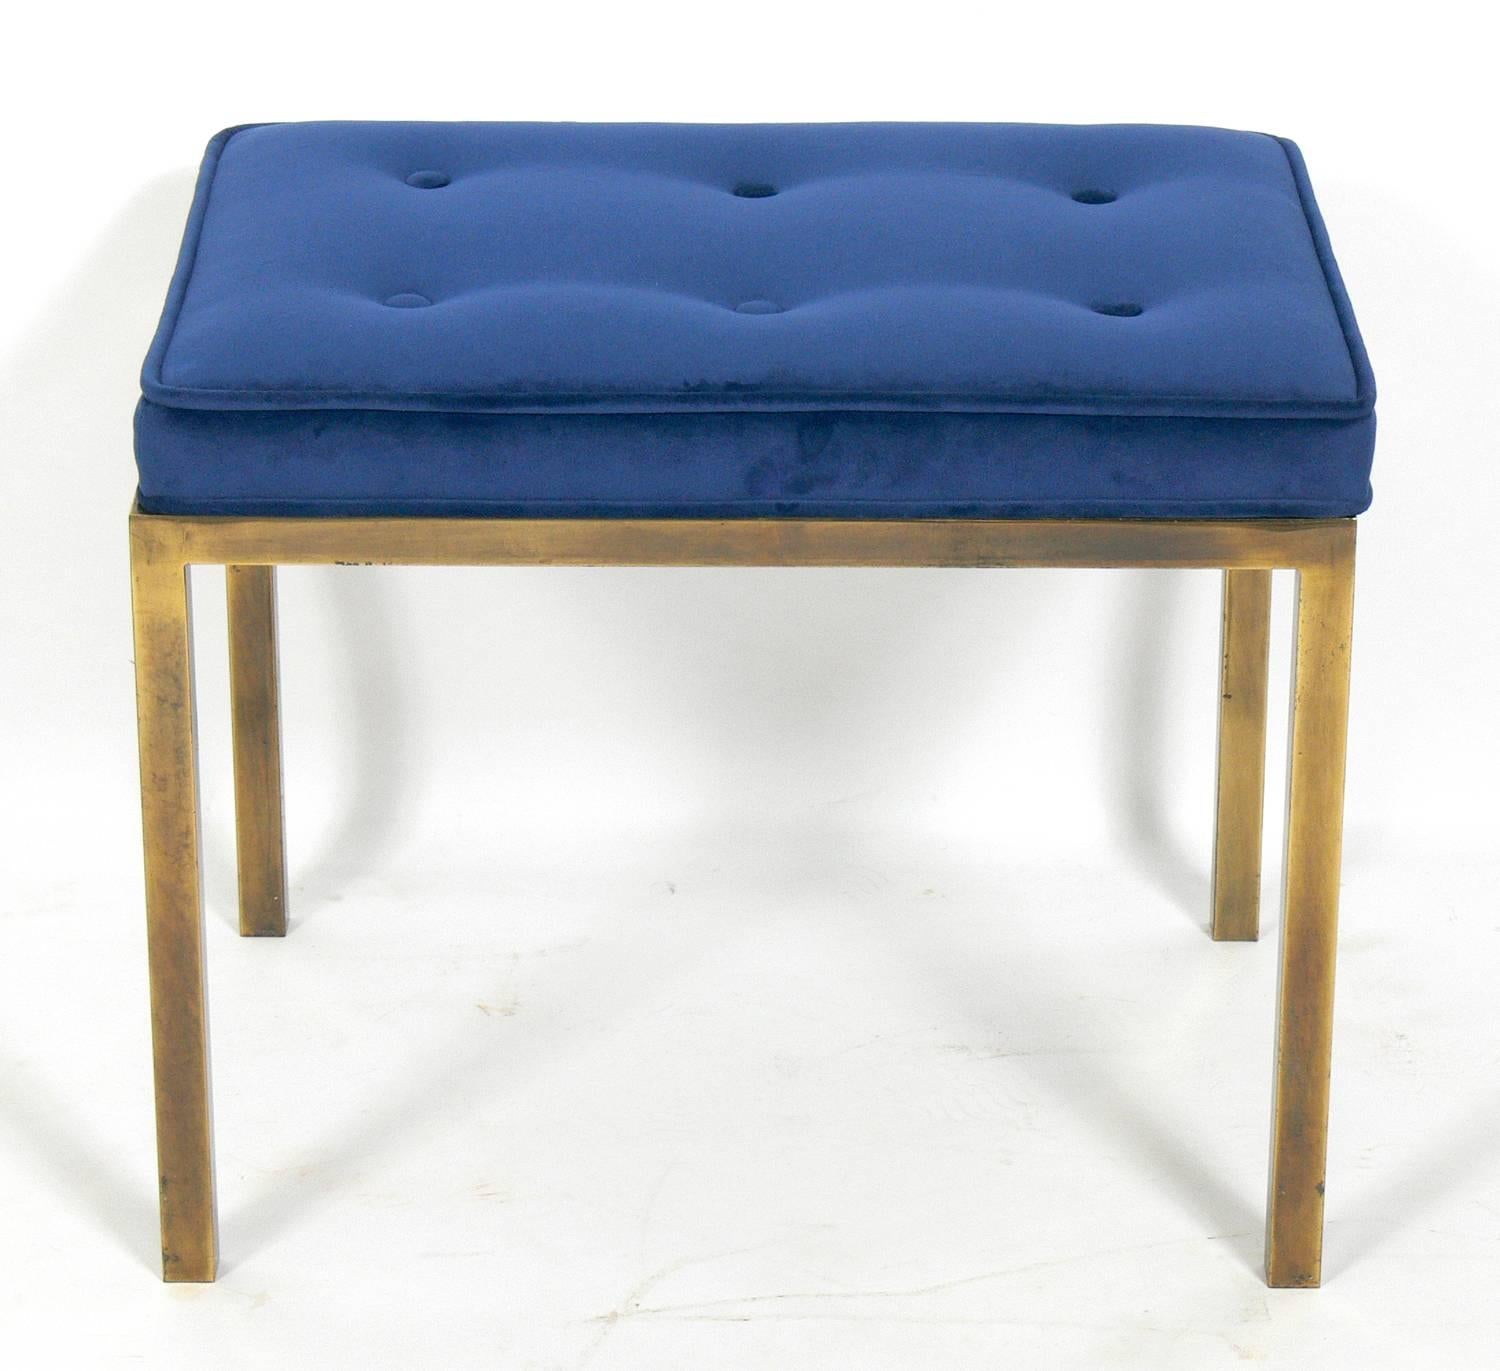 Clean lined brass bench, in the manner of Edward Wormley for Dunbar, American, circa 1960s. It has been reupholstered in an indigo blue color velvety fabric. Brass retains warm original distressed patina.